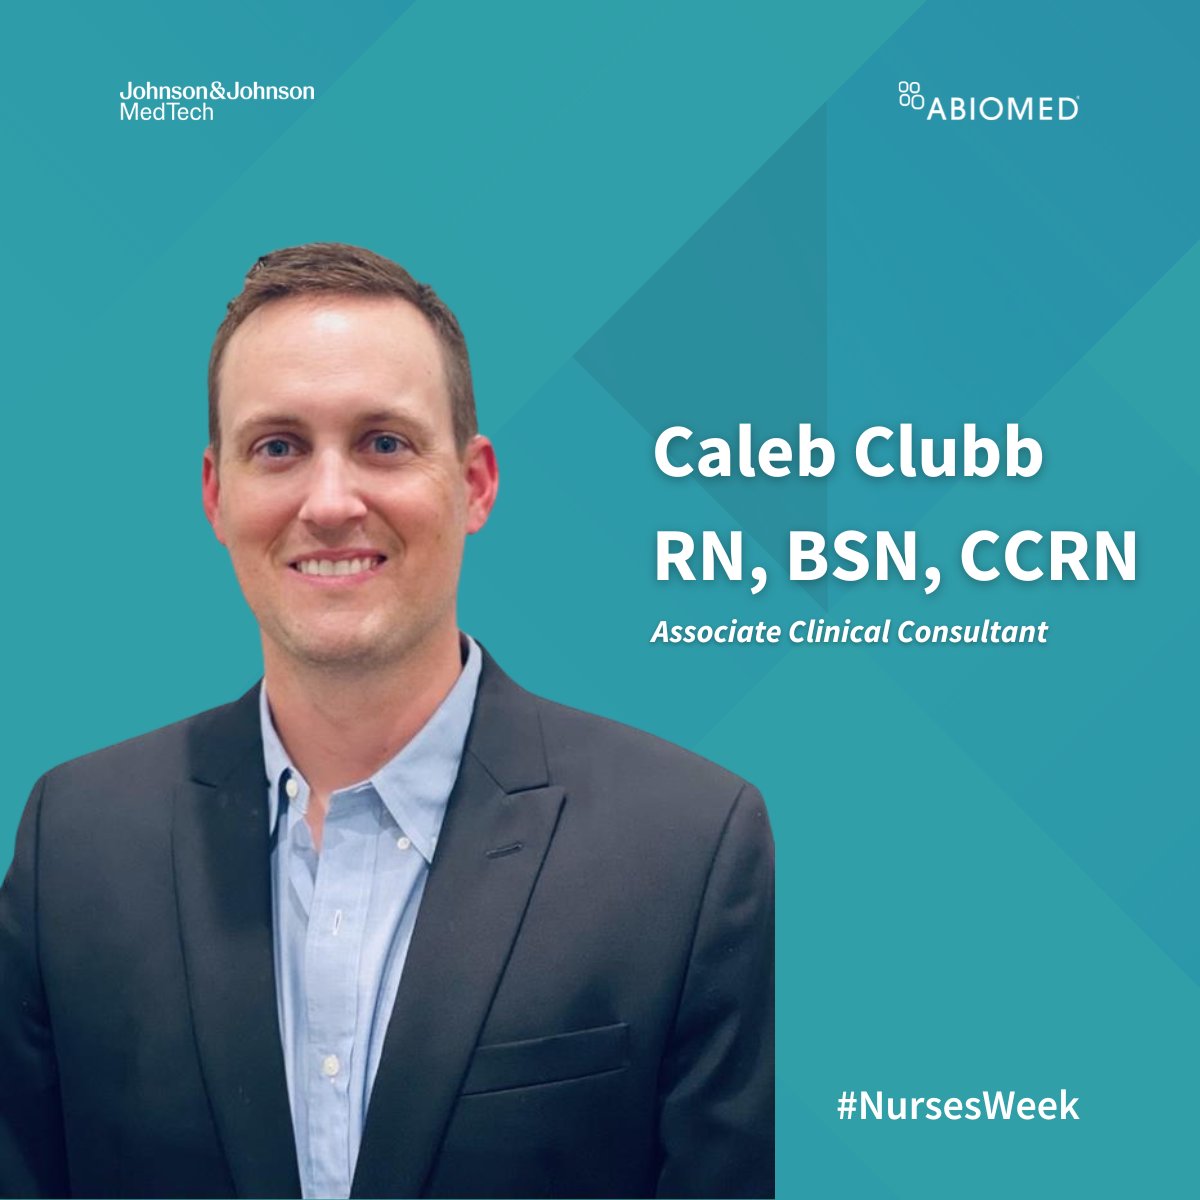 Happy #NursesWeek to all of the exceptional nurses who put #patientsfirst every day. 

To kick off a week of spotlighting just a few of the many great nurses at Abiomed we're featuring Caleb Clubb, RN - one of our dedicated associate clinical consultants.